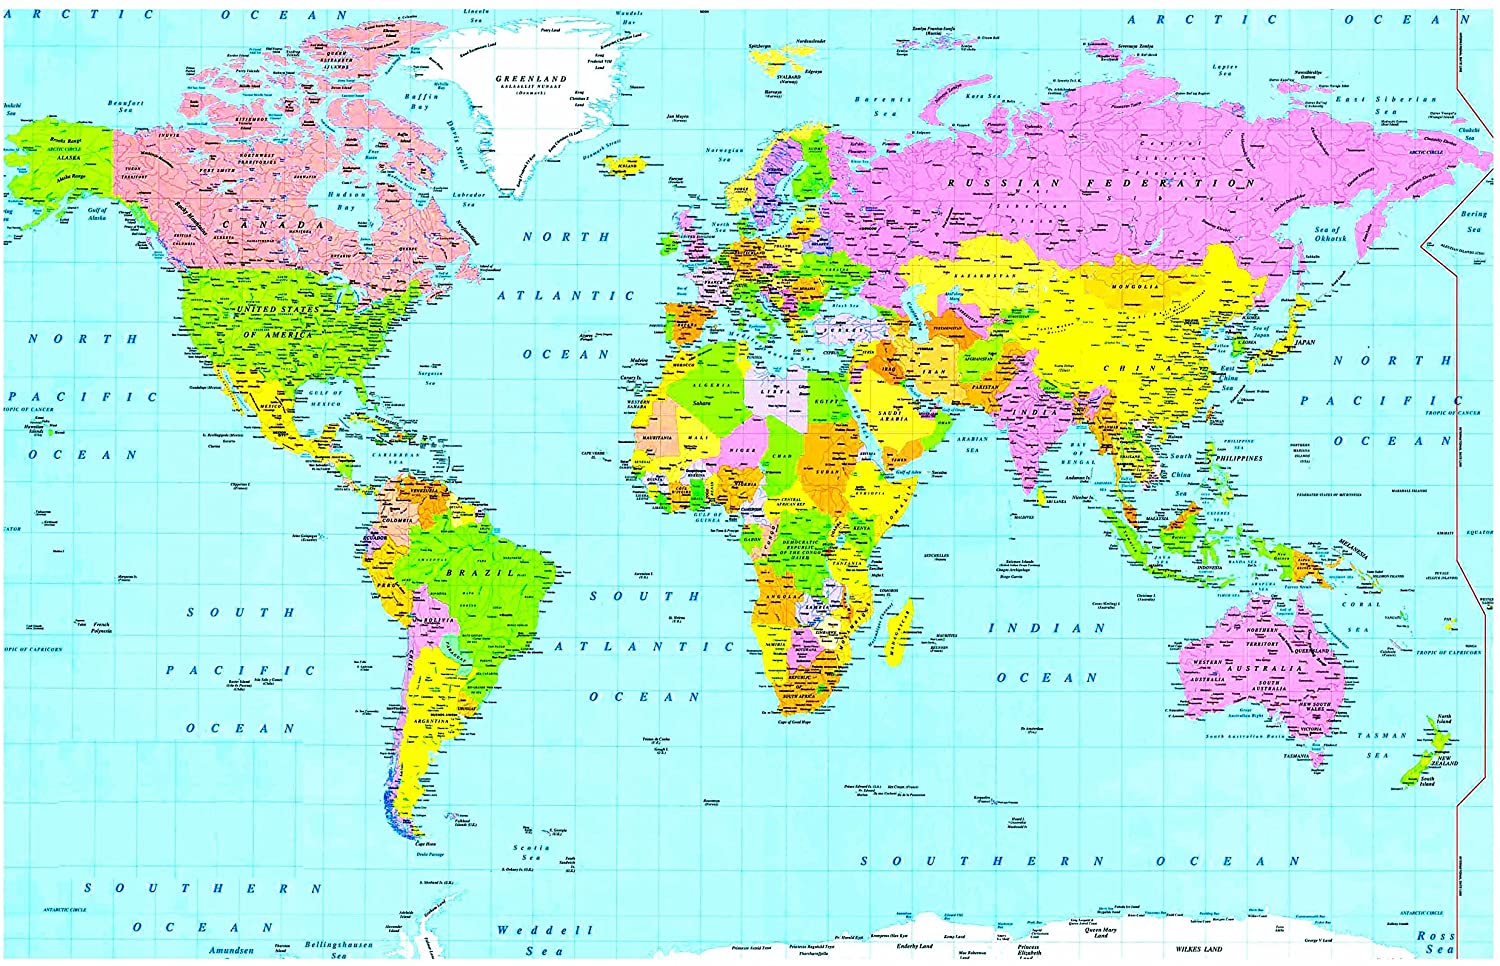 always-prefer-atlas-world-map-to-discover-more-about-any-place